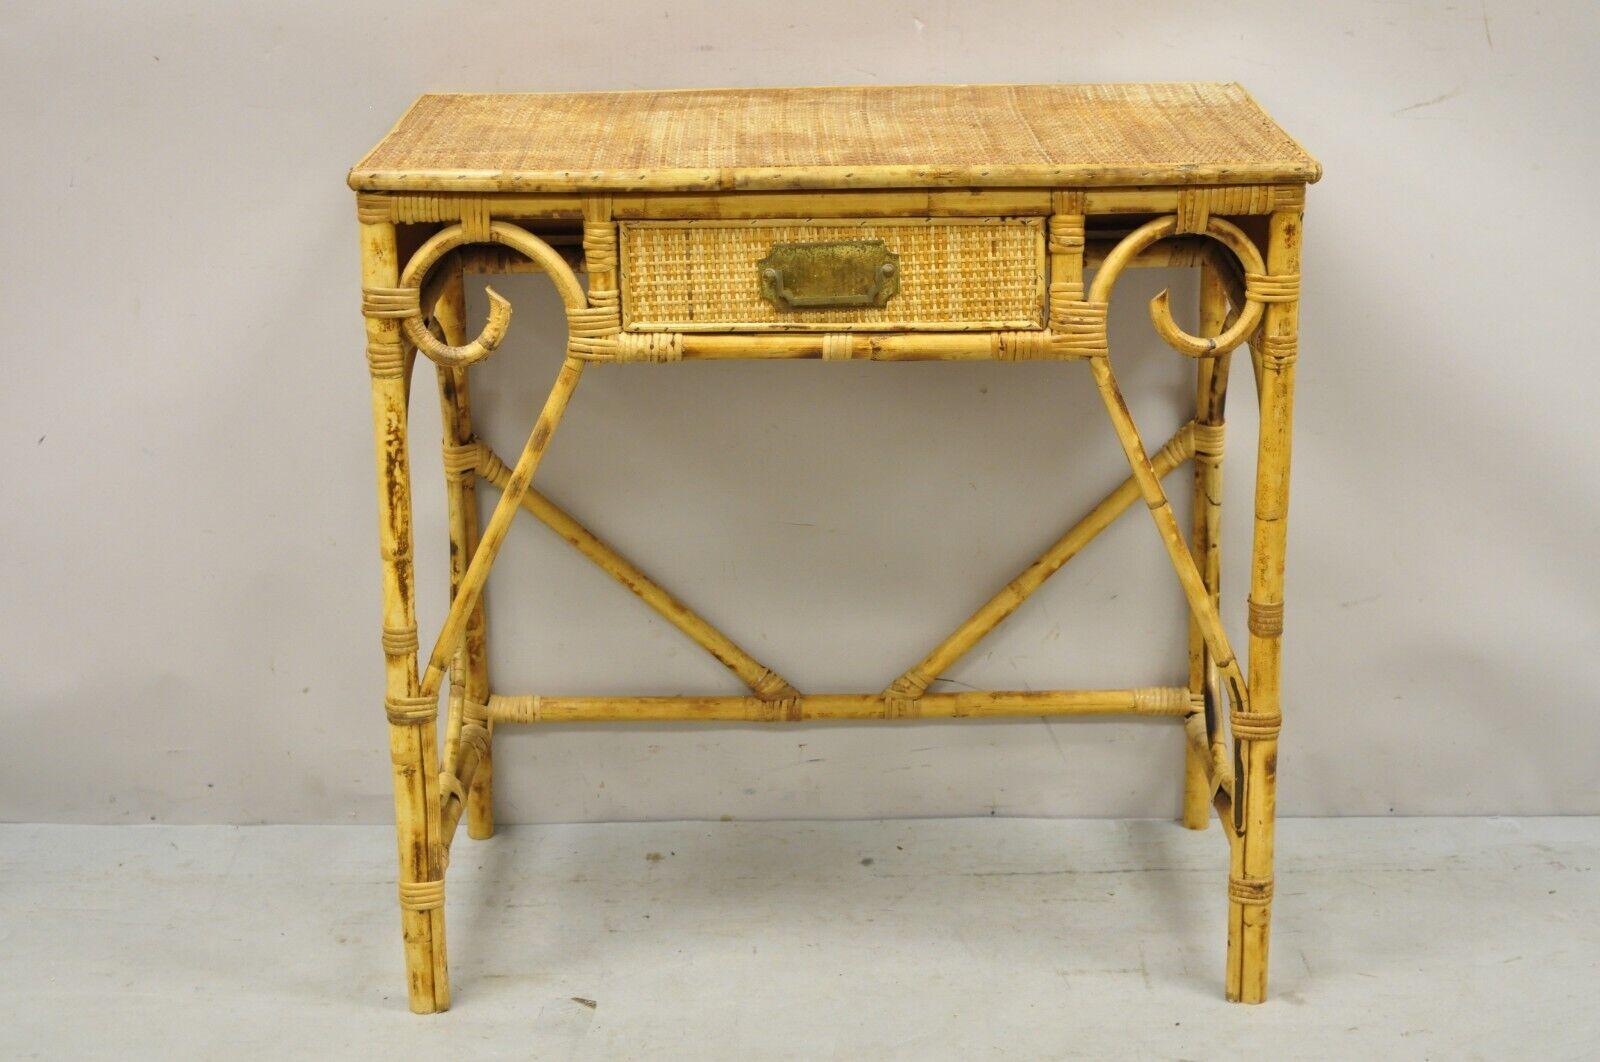 Vintage rattan and bamboo victorian style small vanity table desk with drawer. Item listed is a unique petite size, bent bamboo design, woven rattan top, 1 drawer, very nice vintage item, great style and form. Circa mid to late 20th century.